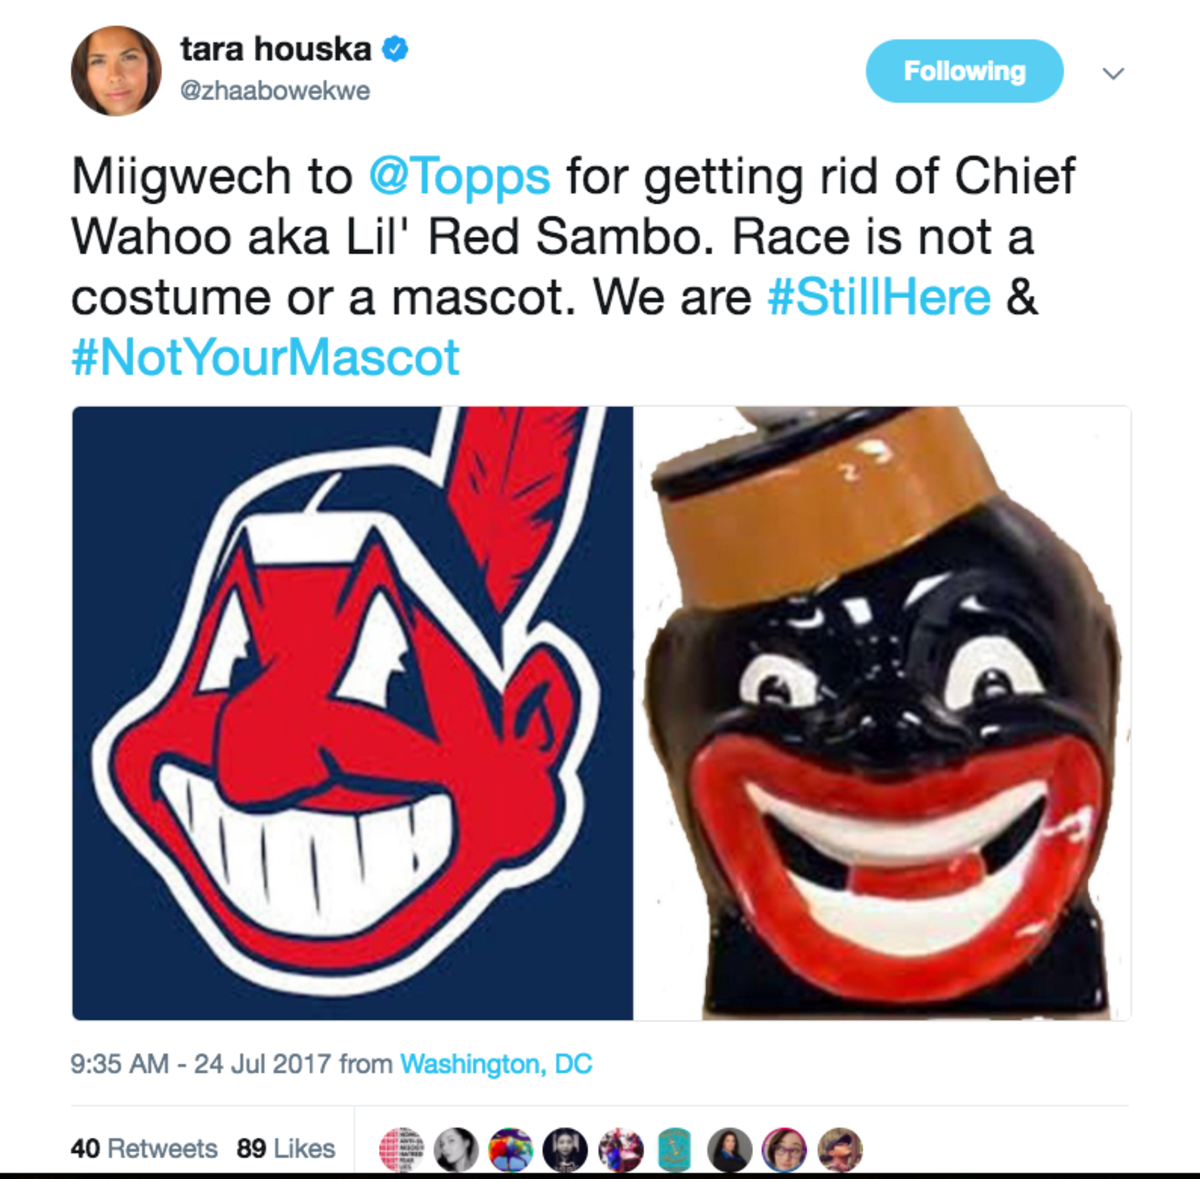 Topps, Sole Baseball Card Manufacturer For MLB, Says It Will No Longer  Print Chief Wahoo Mascot - ICT News